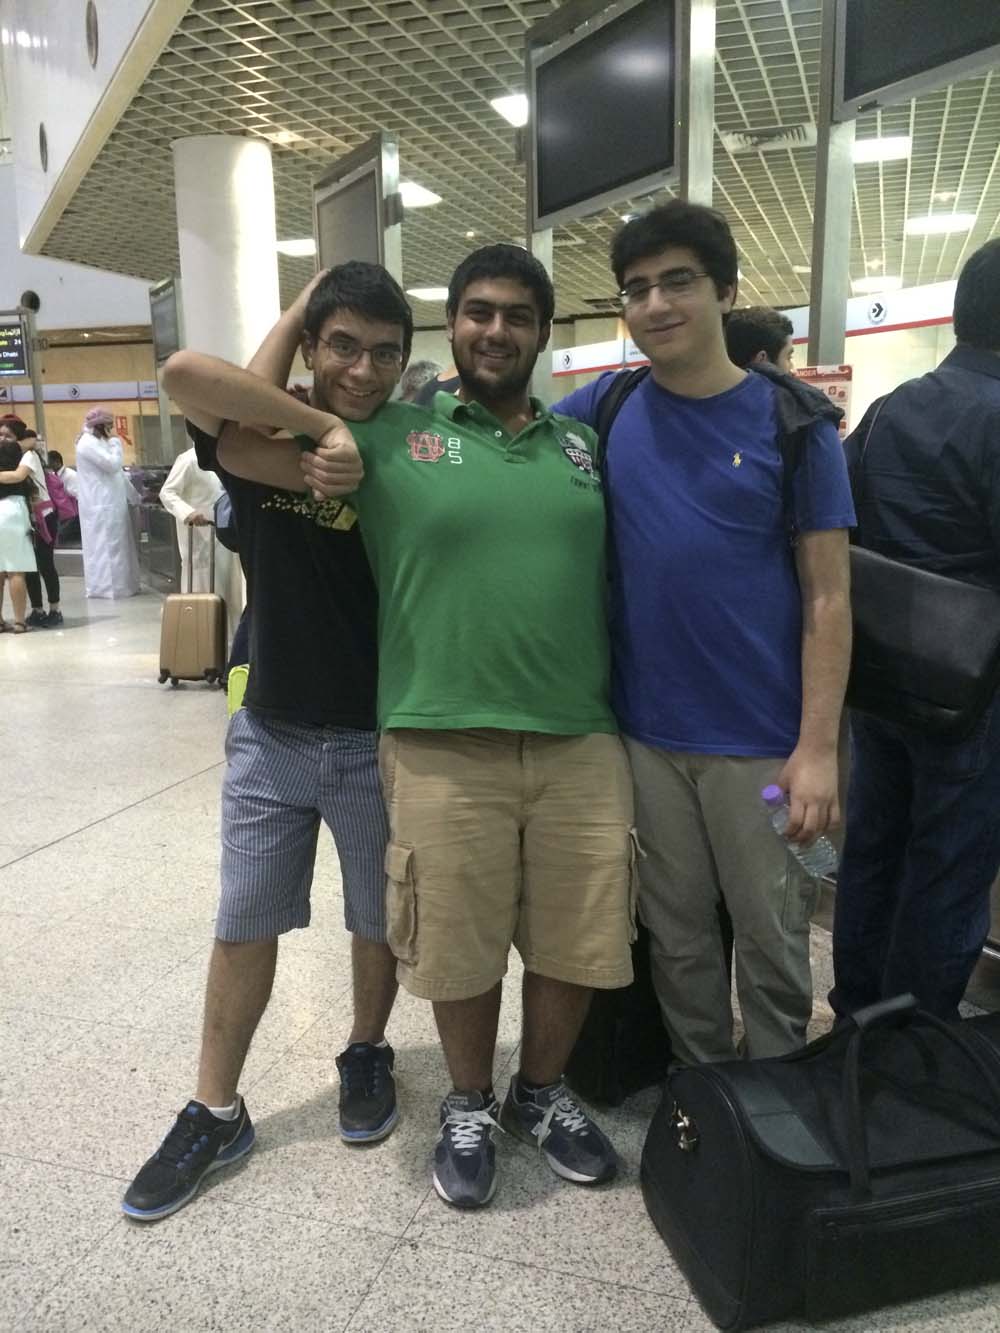 yousef, bader and khaled at the airport on august 9th. the hardest part of this night was driving bader home